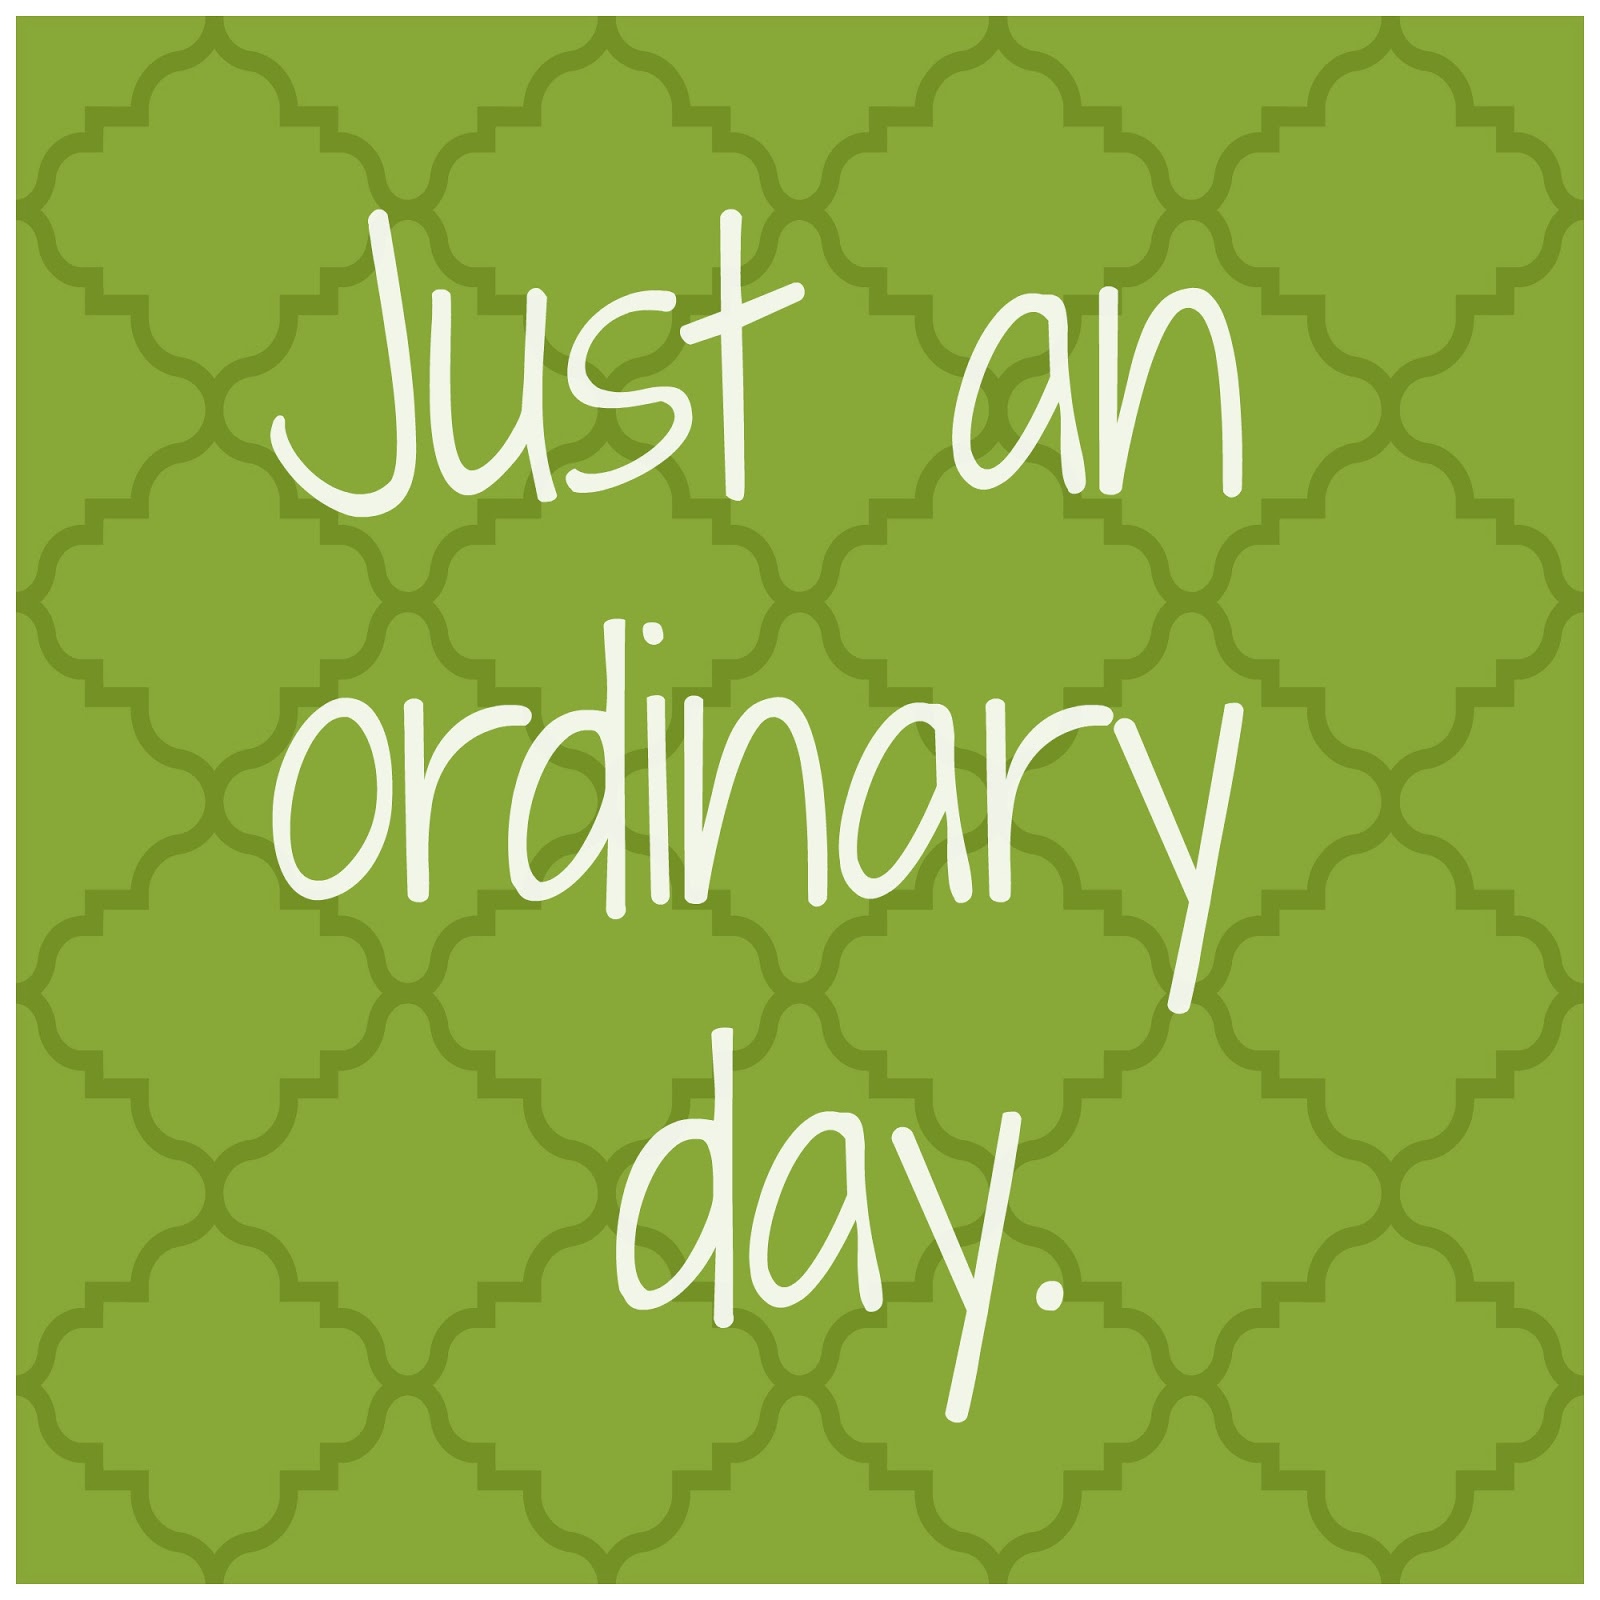 The ordinary day